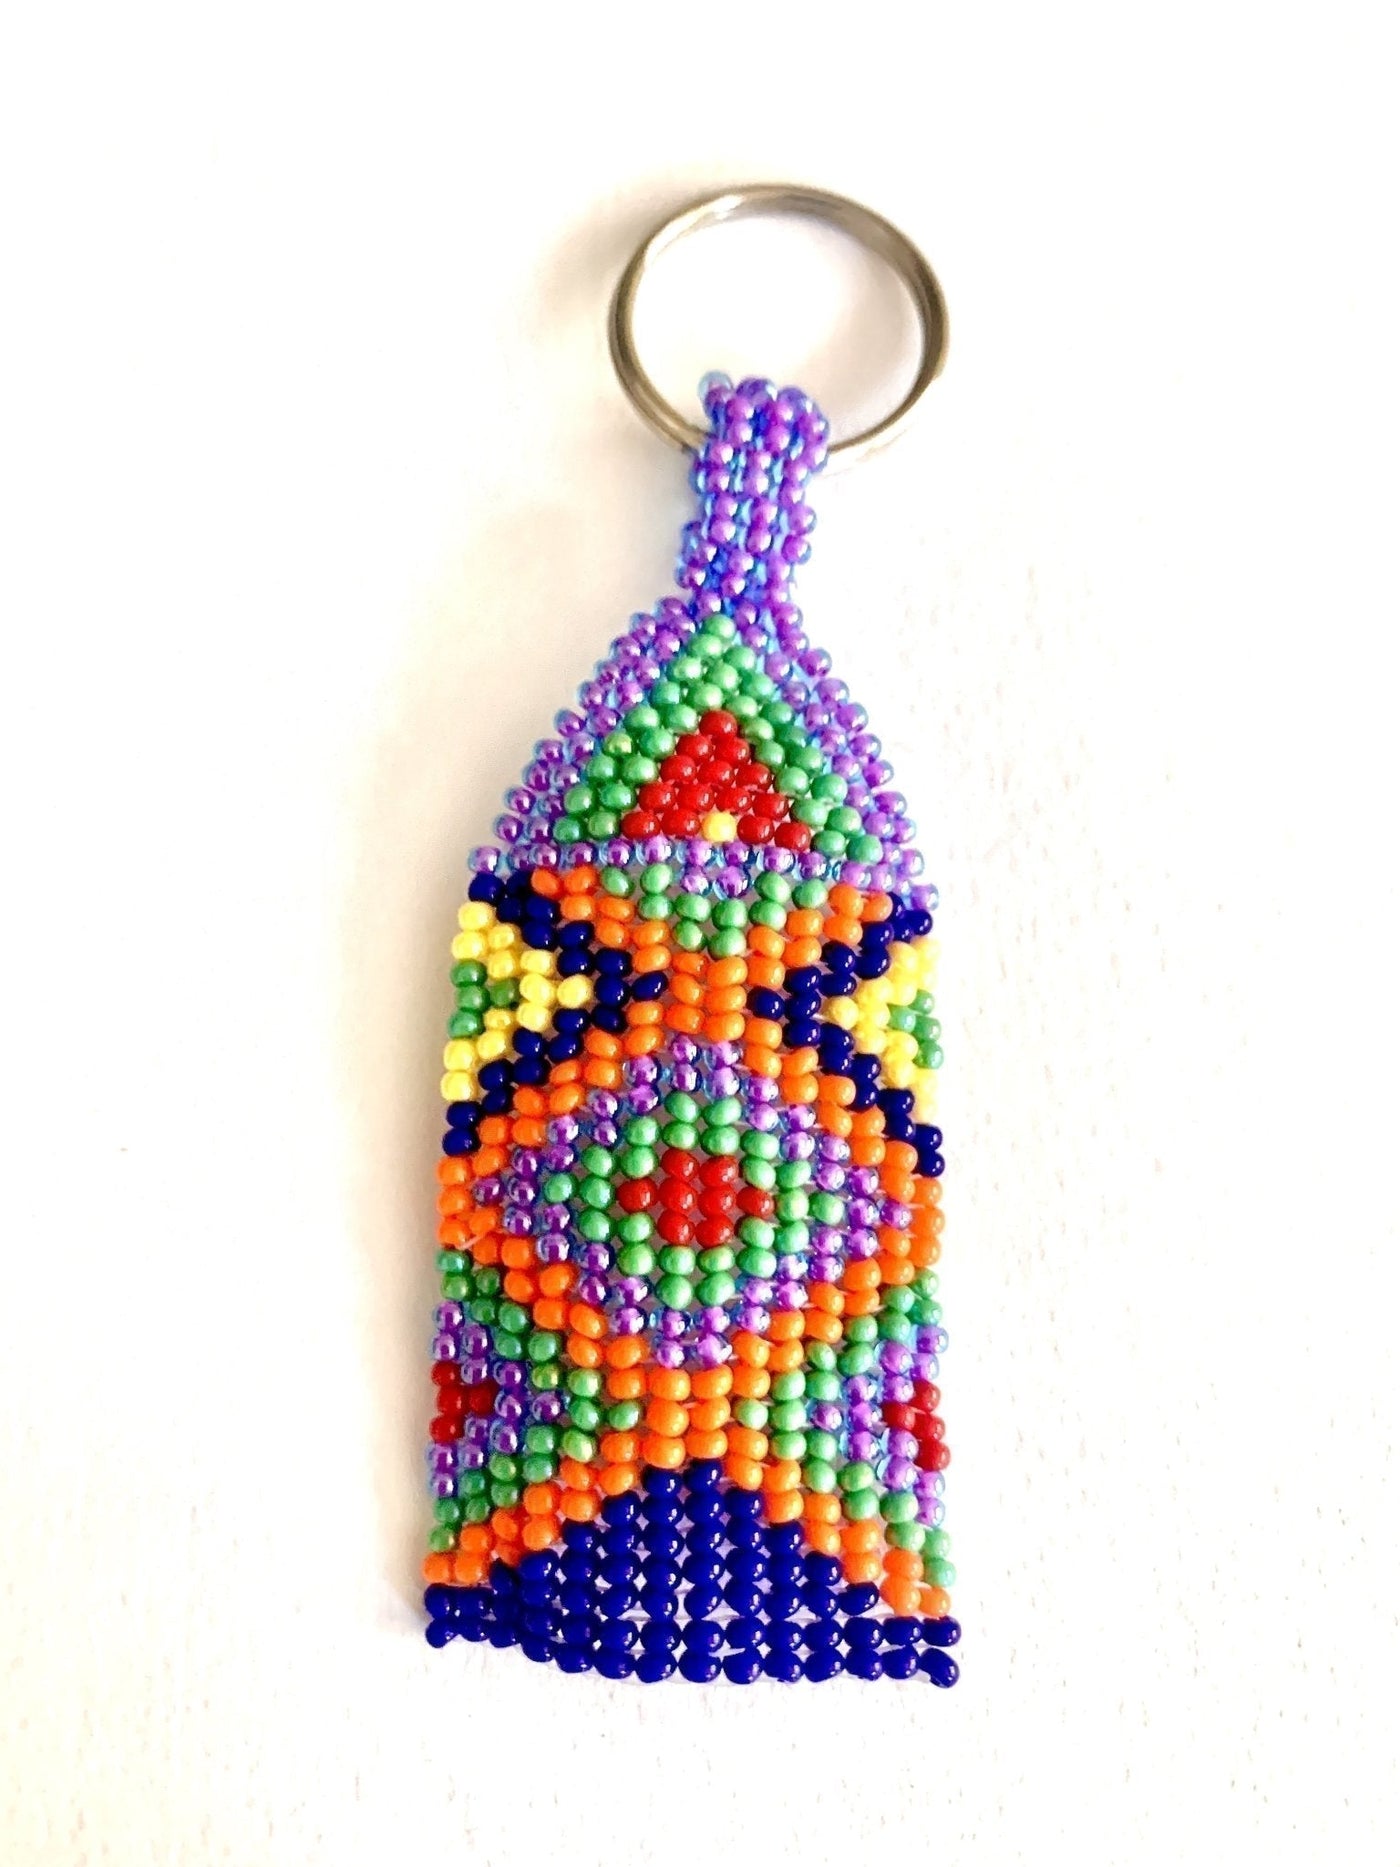 Handmade Limited Edition Bead Keyring Supporting South African Women accessories